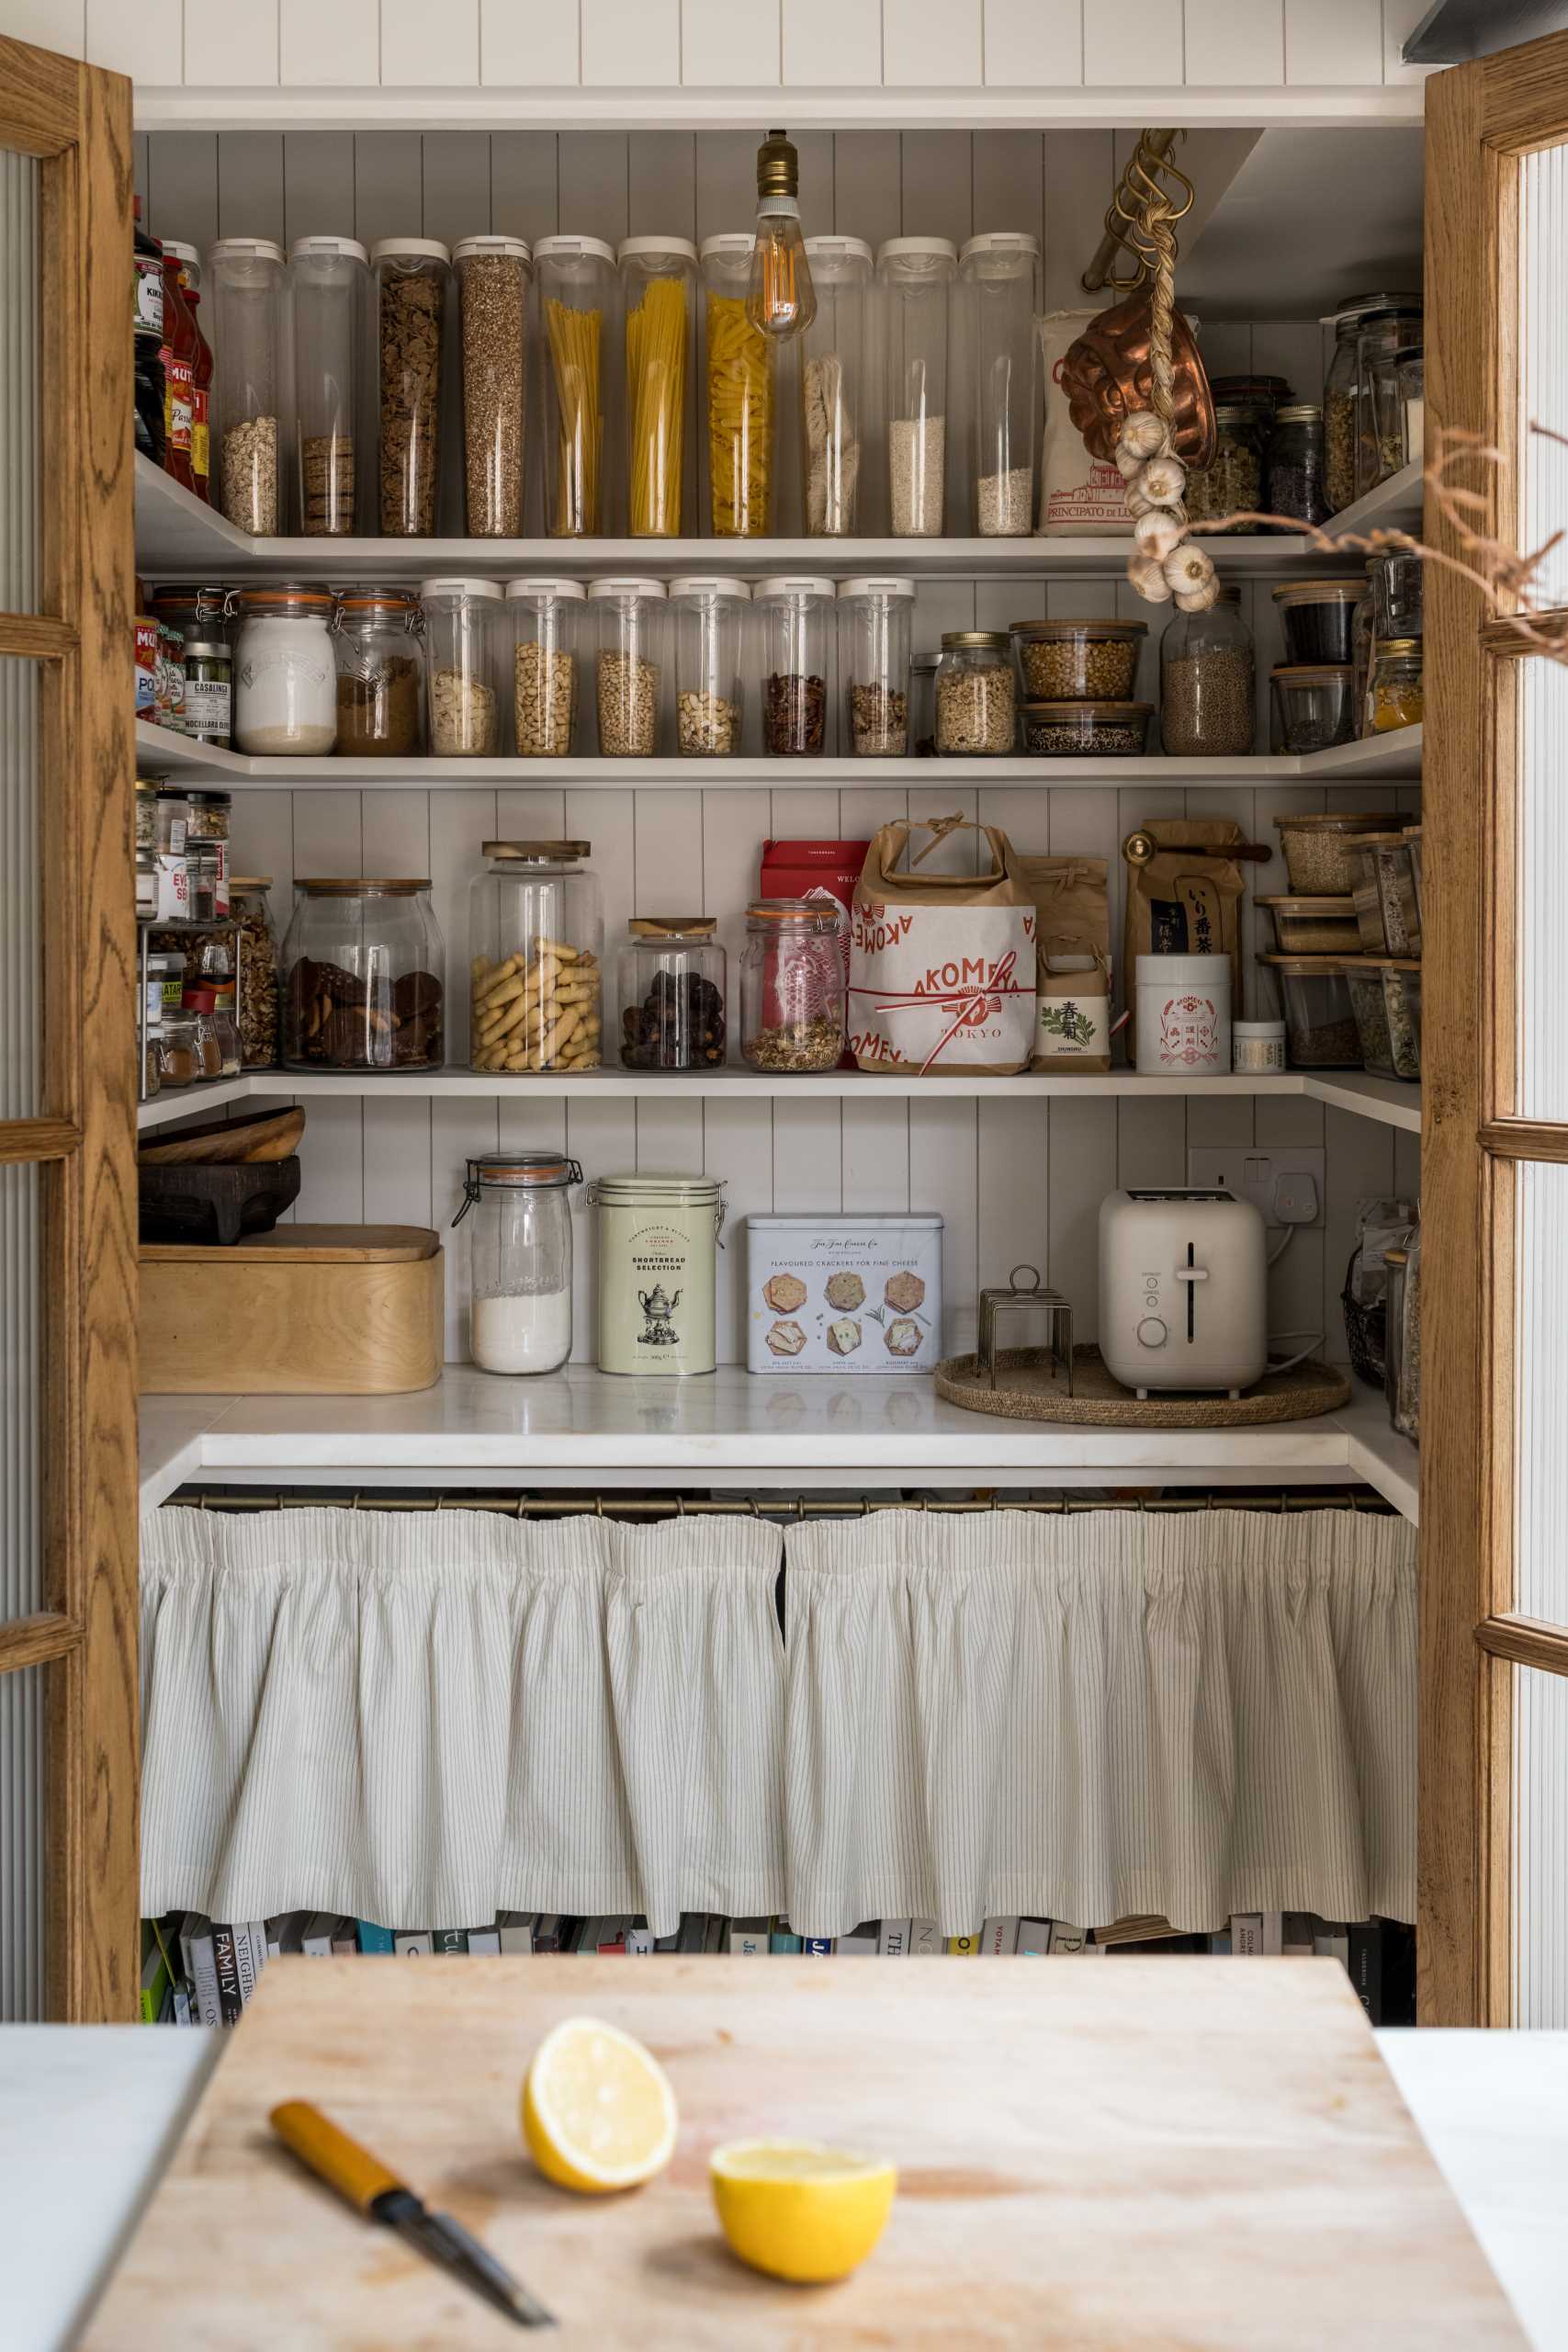 The pantry is considered the hub of the kitchen, with deep walnut framed doors hiding the shelving and storage when not in use.